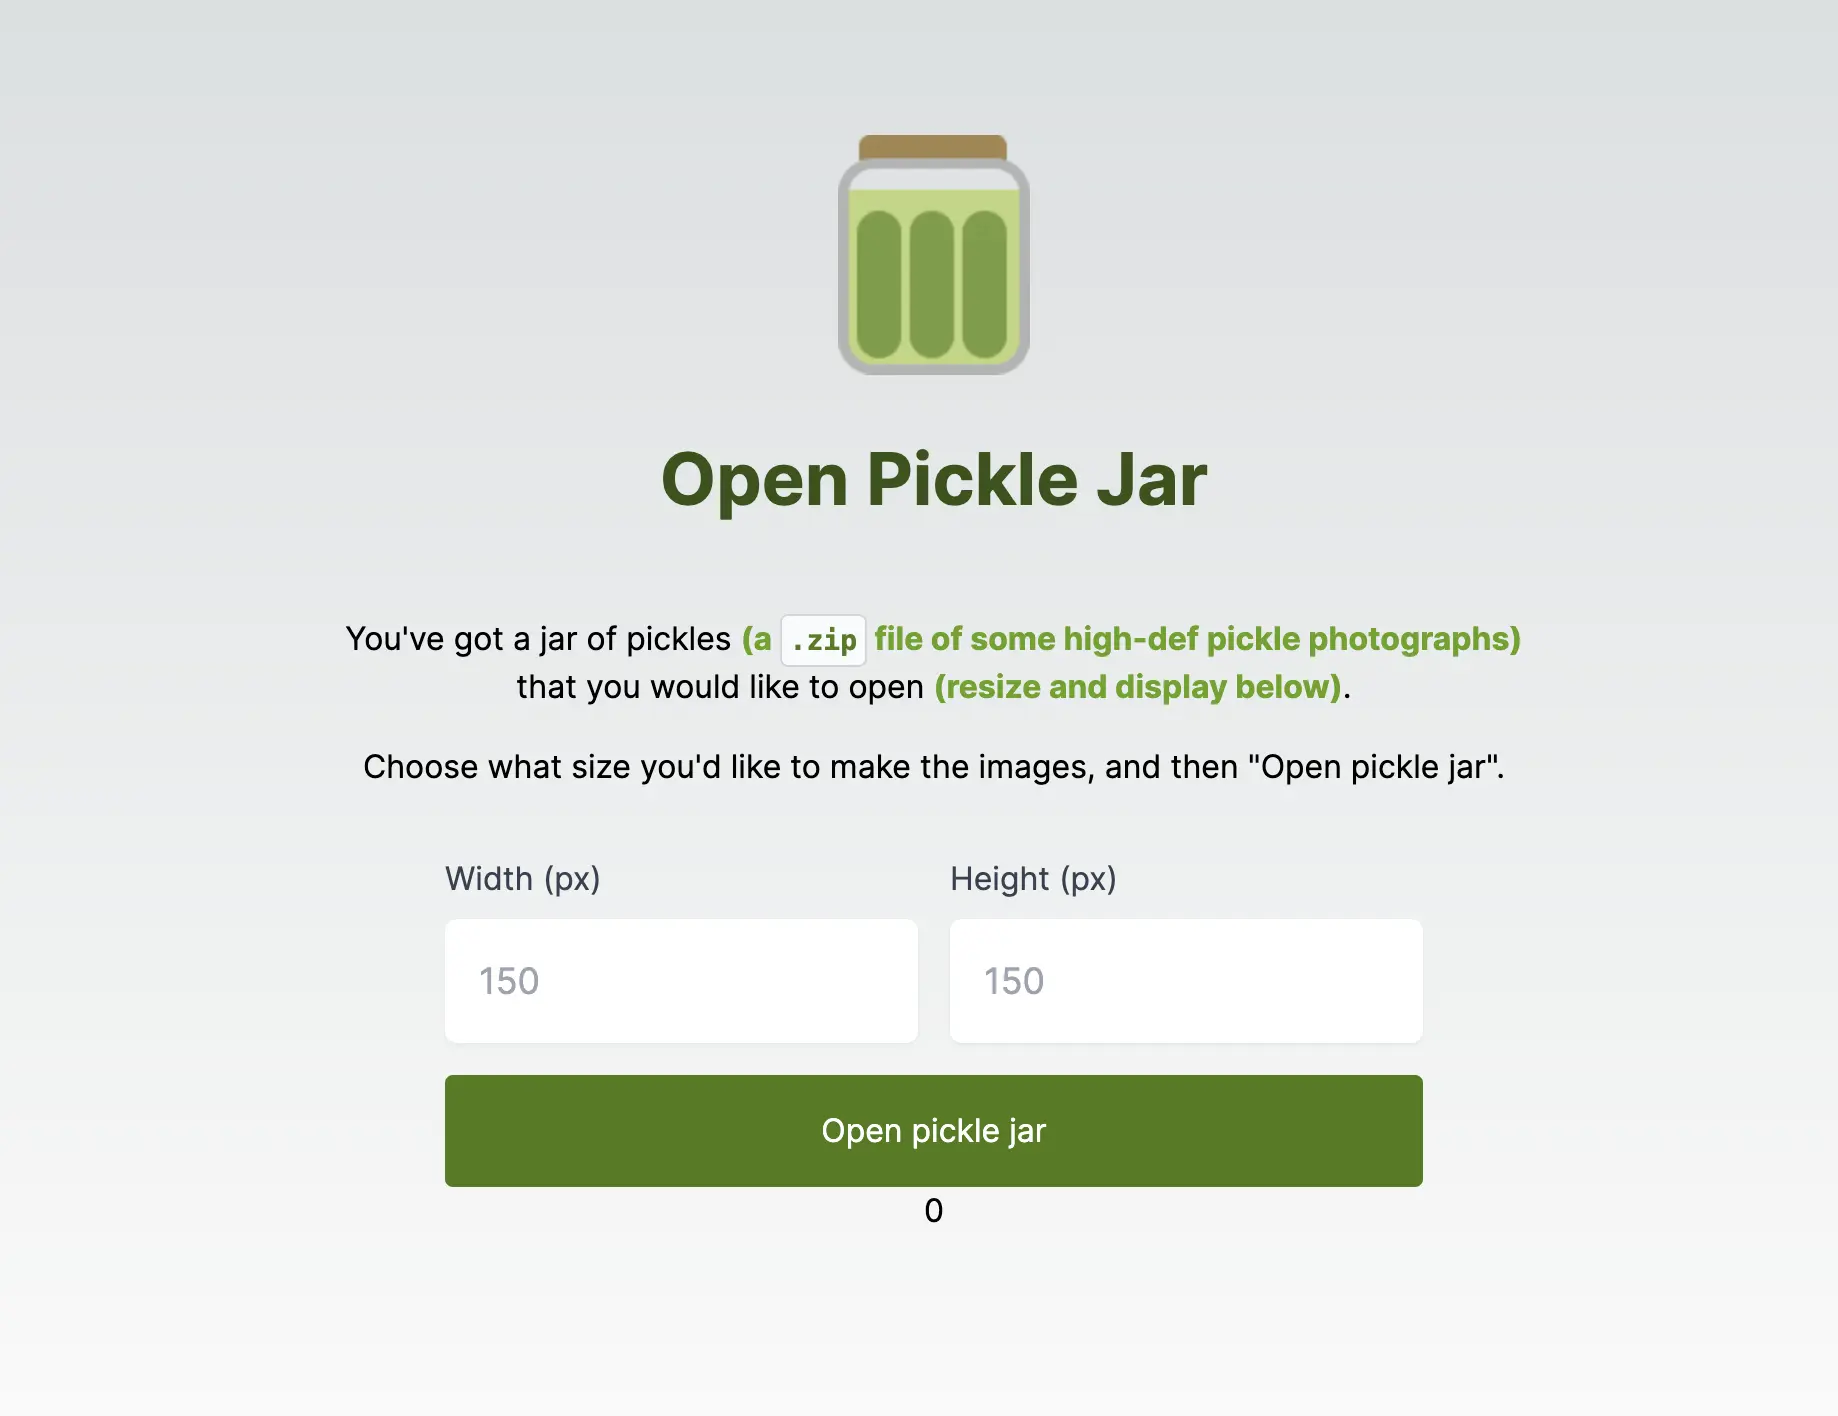 (Screenshot of the demo app; its a single-page app with the header and description "Open Pickle Jar: You've got a jar of pickles (a zip file of some high-def pickle photos) that you would like to open (resize and display below)". Under the description there are two inputs, one for width and one for height, and a button that says "Open pickle jar")